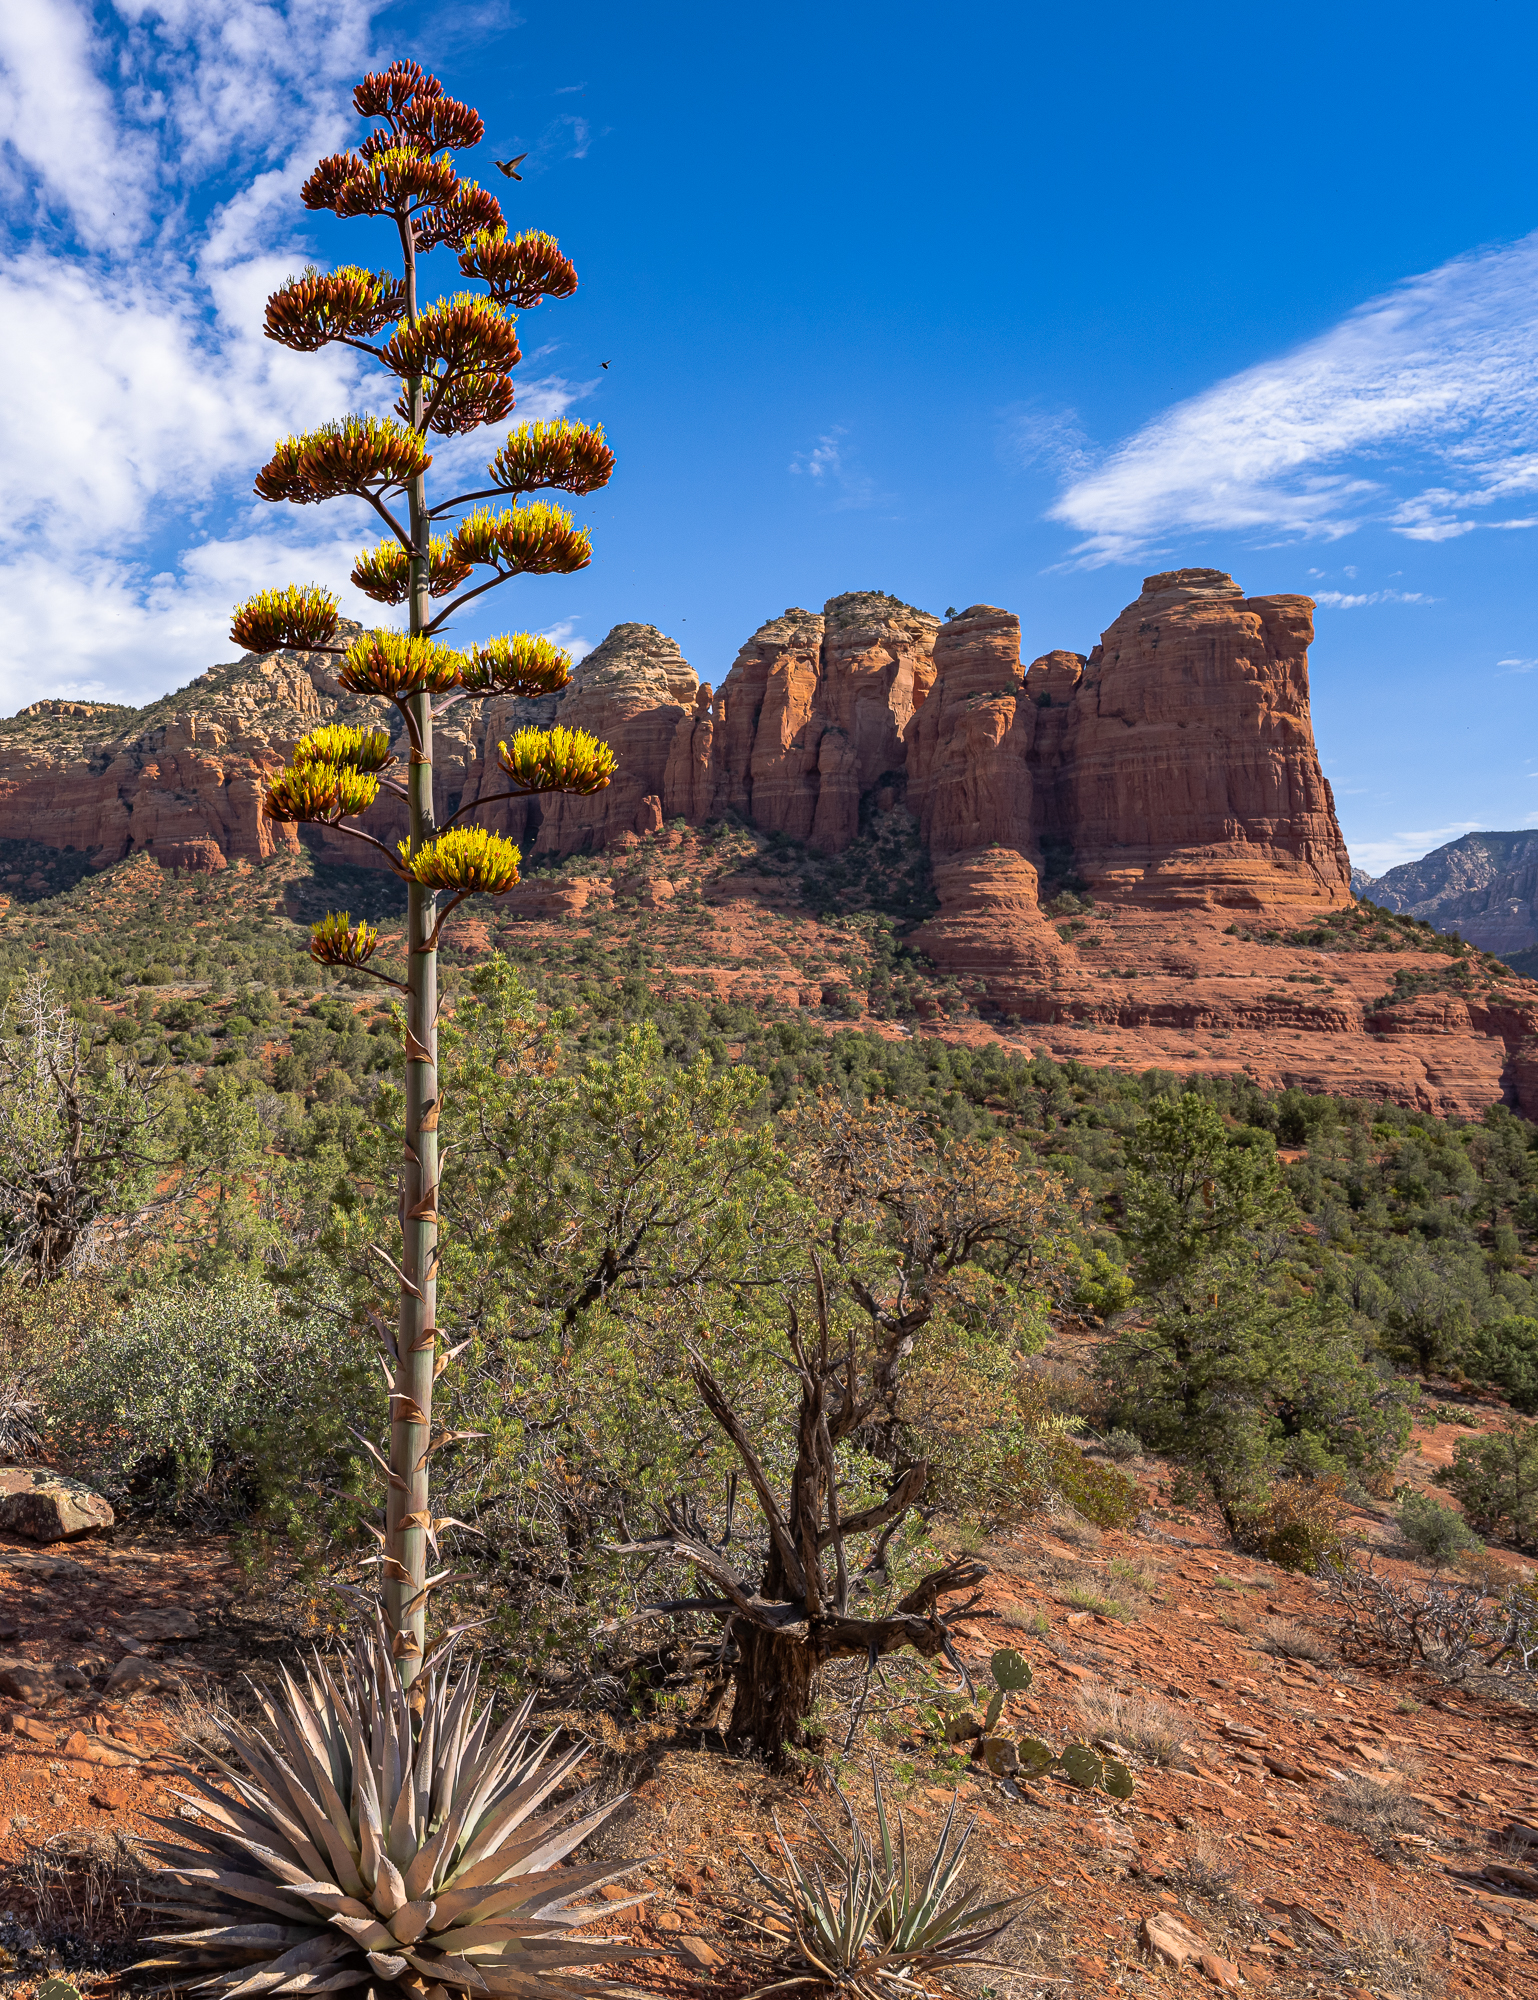 Agave Bloom & Coffeepot Rock” (cropped to a vertical